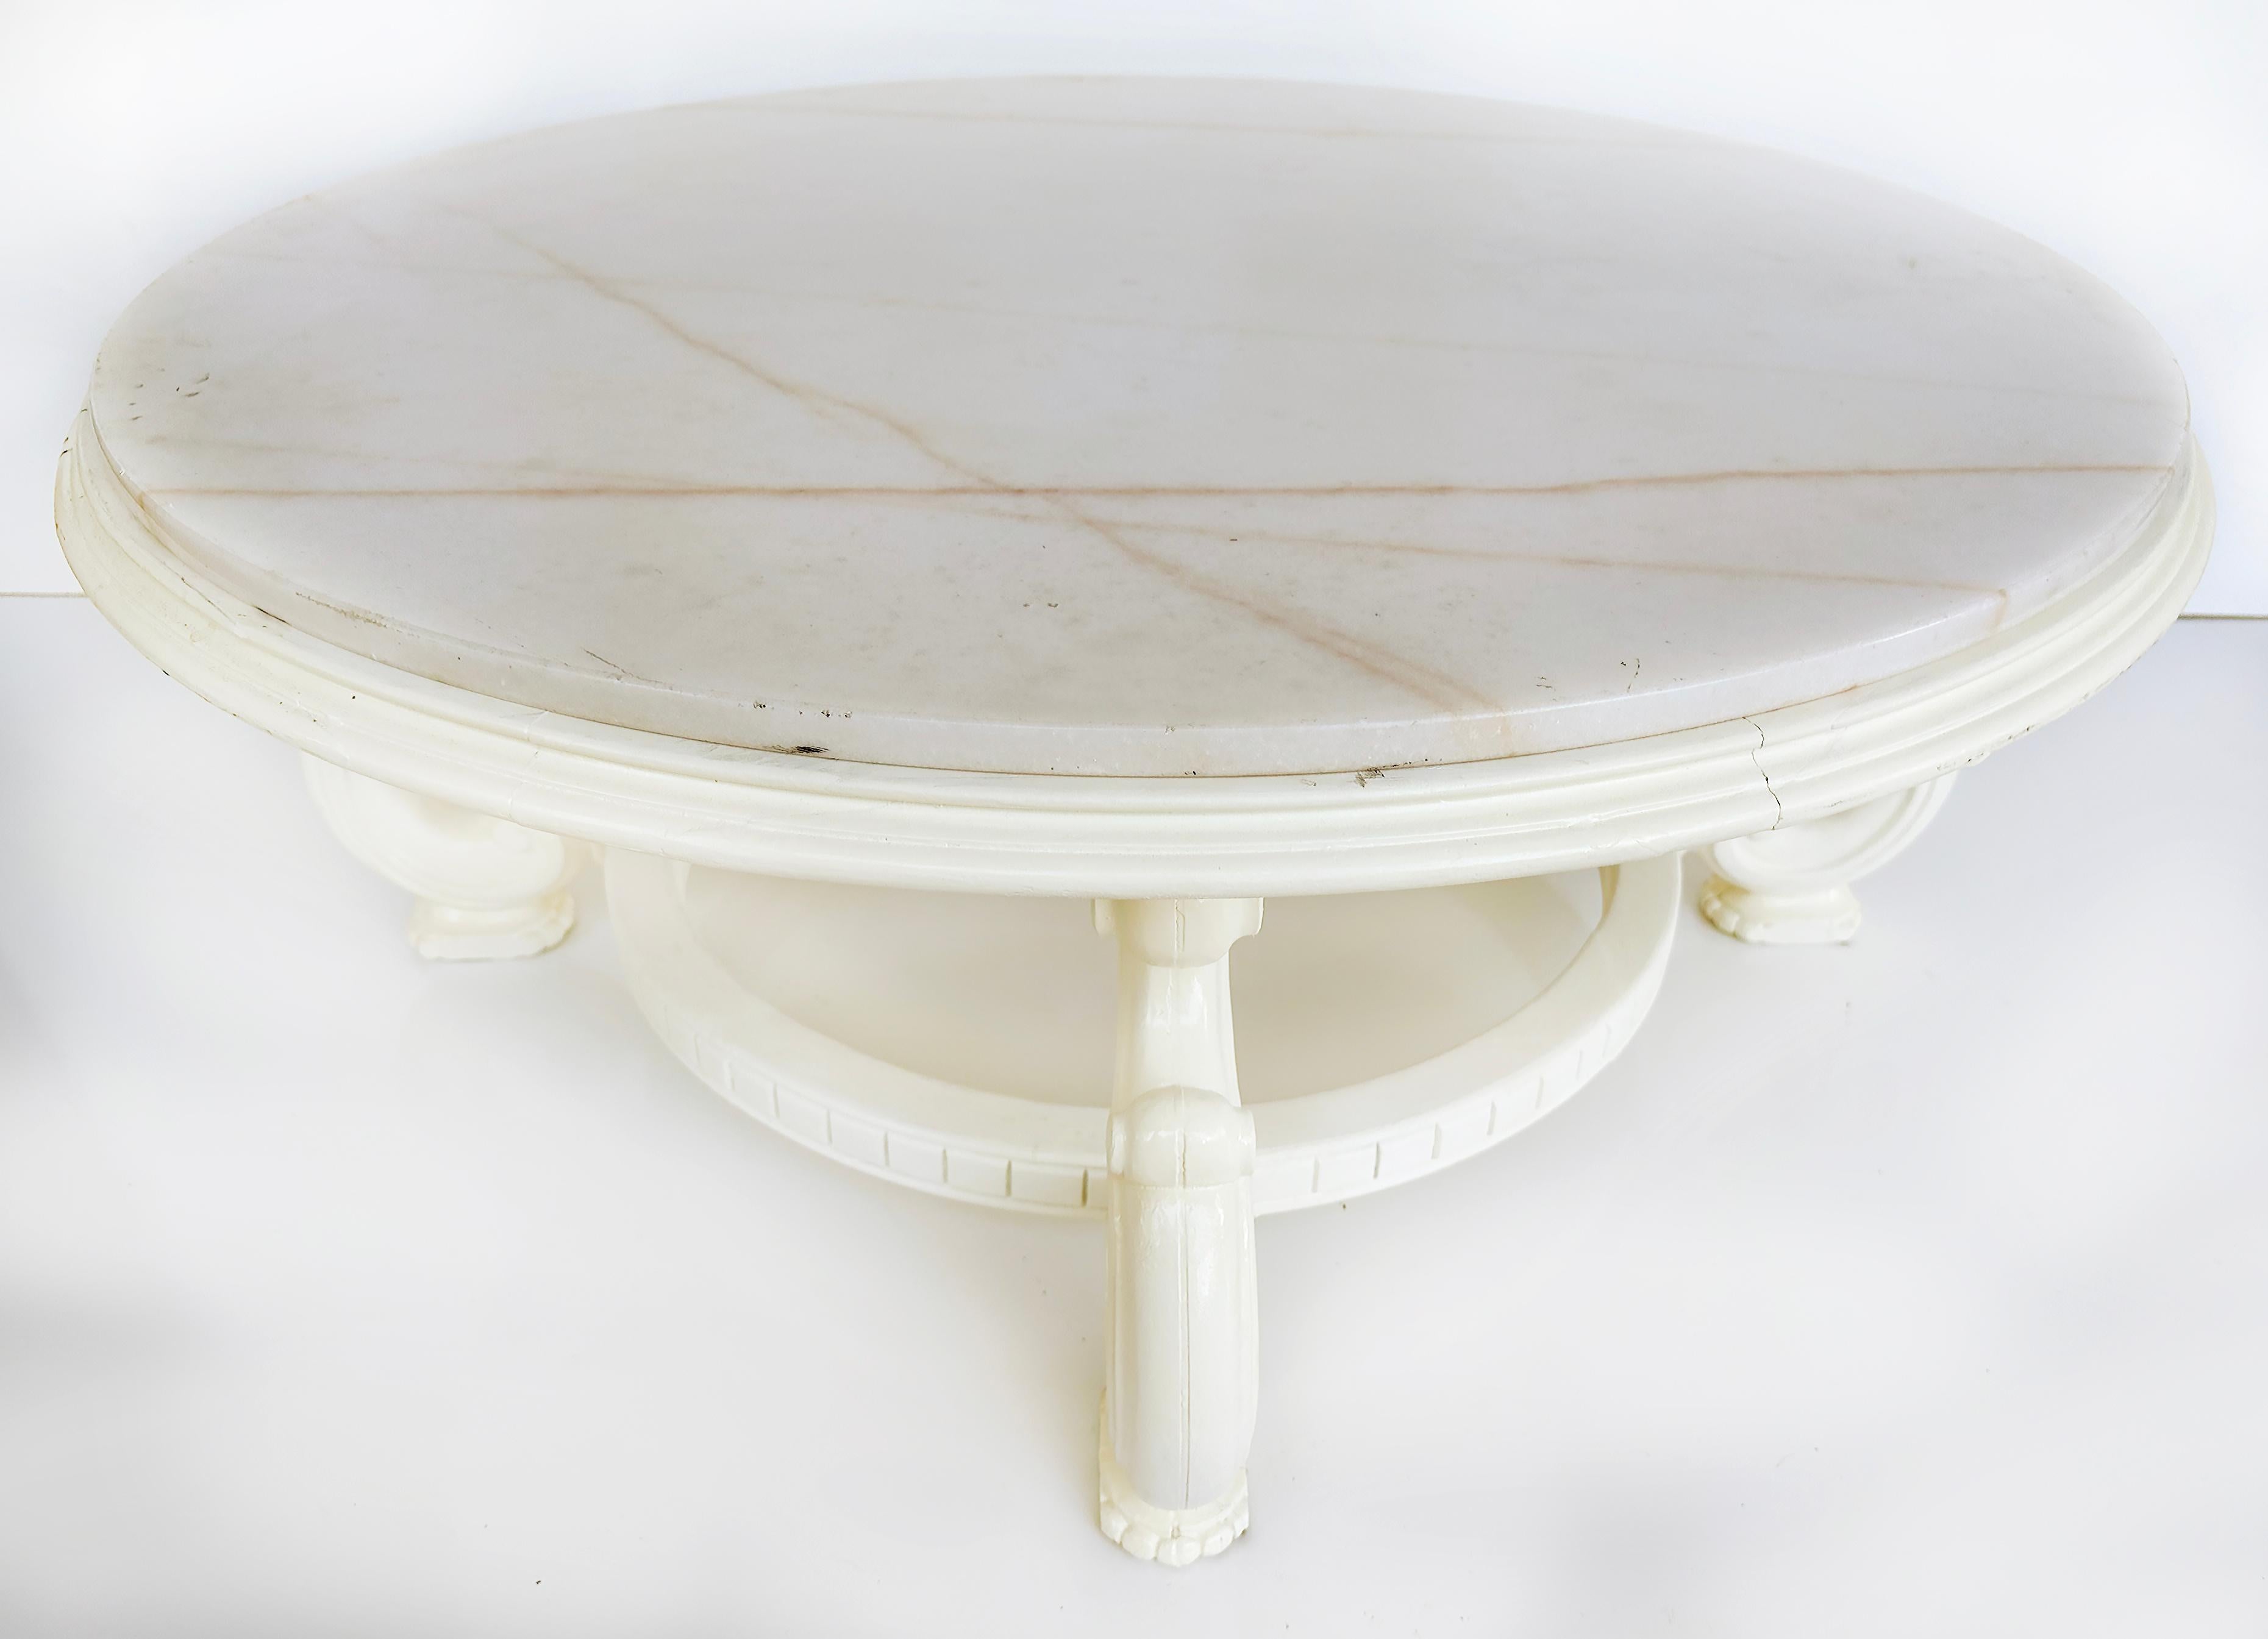 Vintage White Lacquered Round Marble Top Coffee Table

Offered for sale is s a vintage white lacquered marble top coffee table. The table has previously been finished in white. The table is supported by four scrolled legs that return to a round